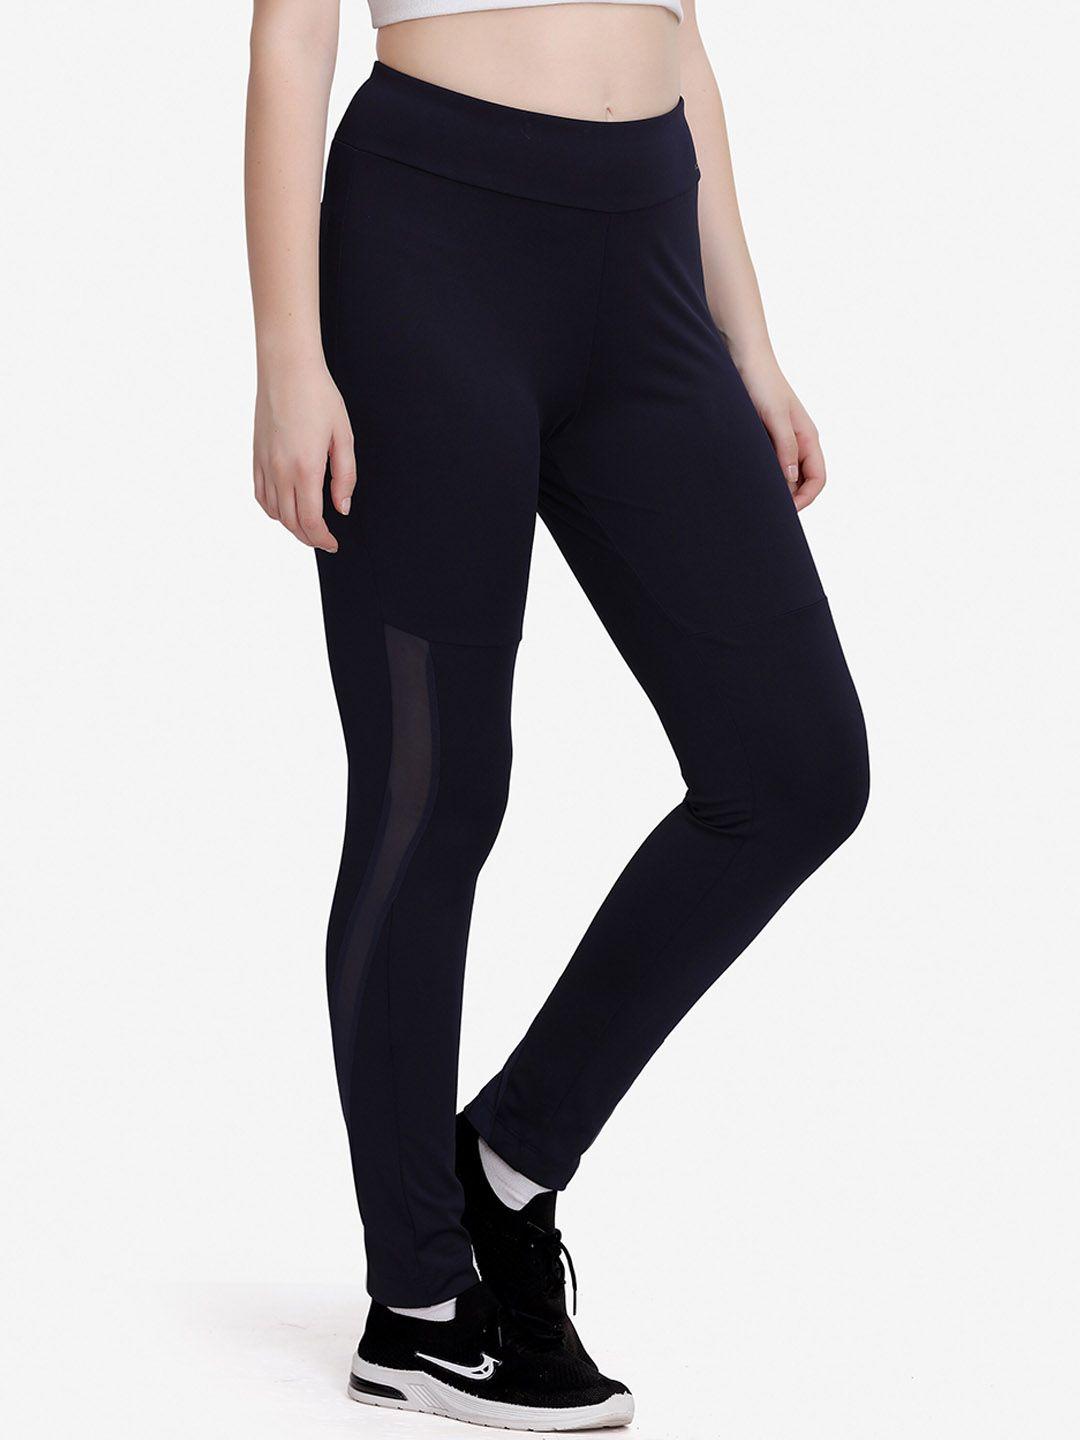 maysixty women navy-blue solid ankle-length sports tights